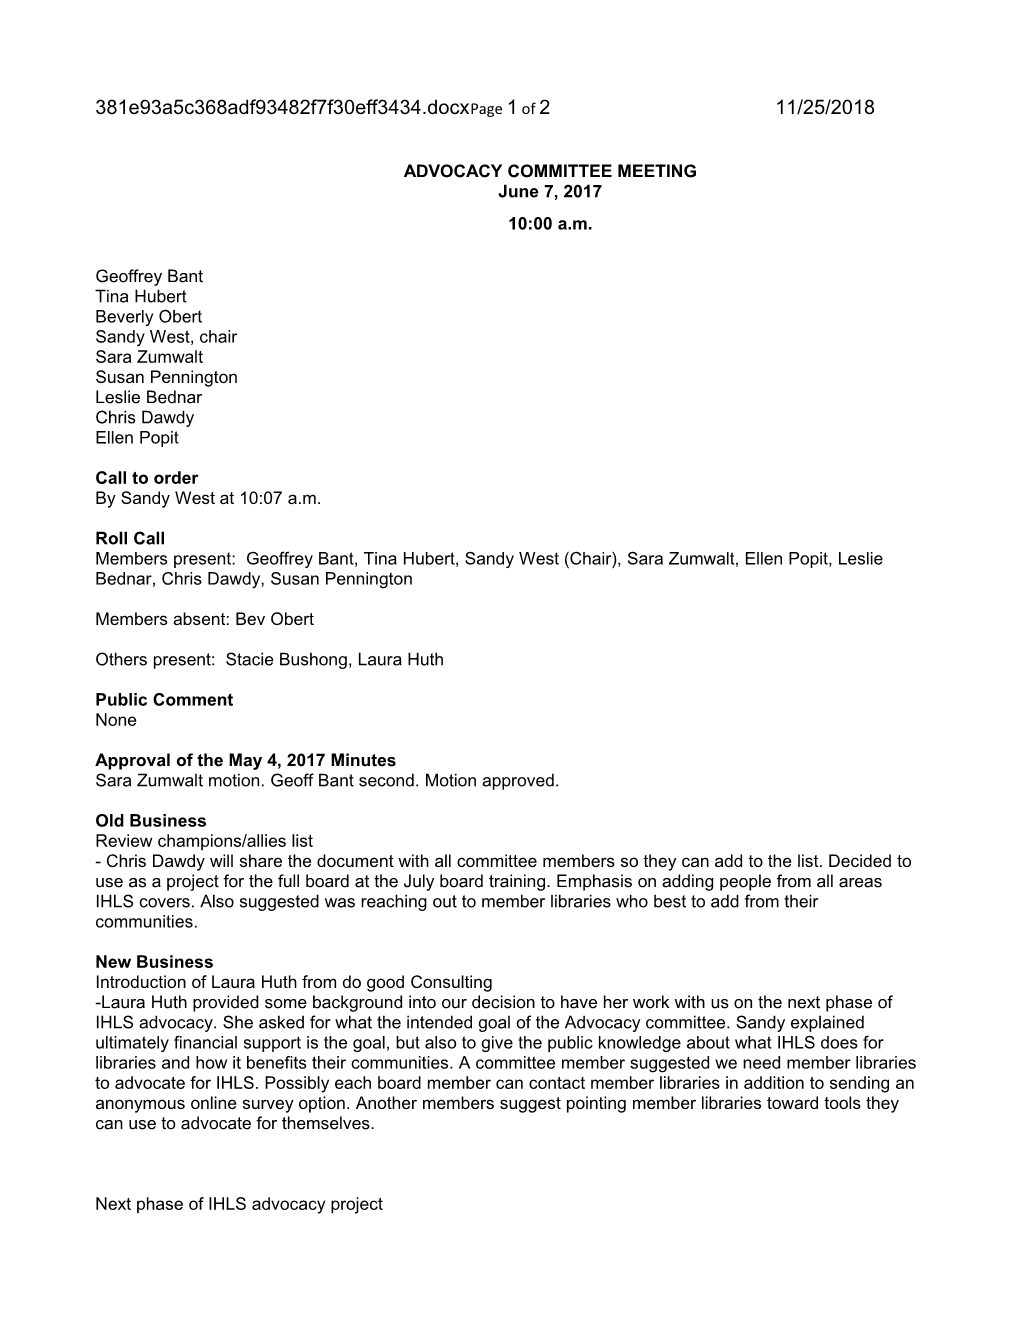 3.1 DRAFT Minutes-Advocacy Comm Mtg 06-07-17Page 1 of 212/6/2018